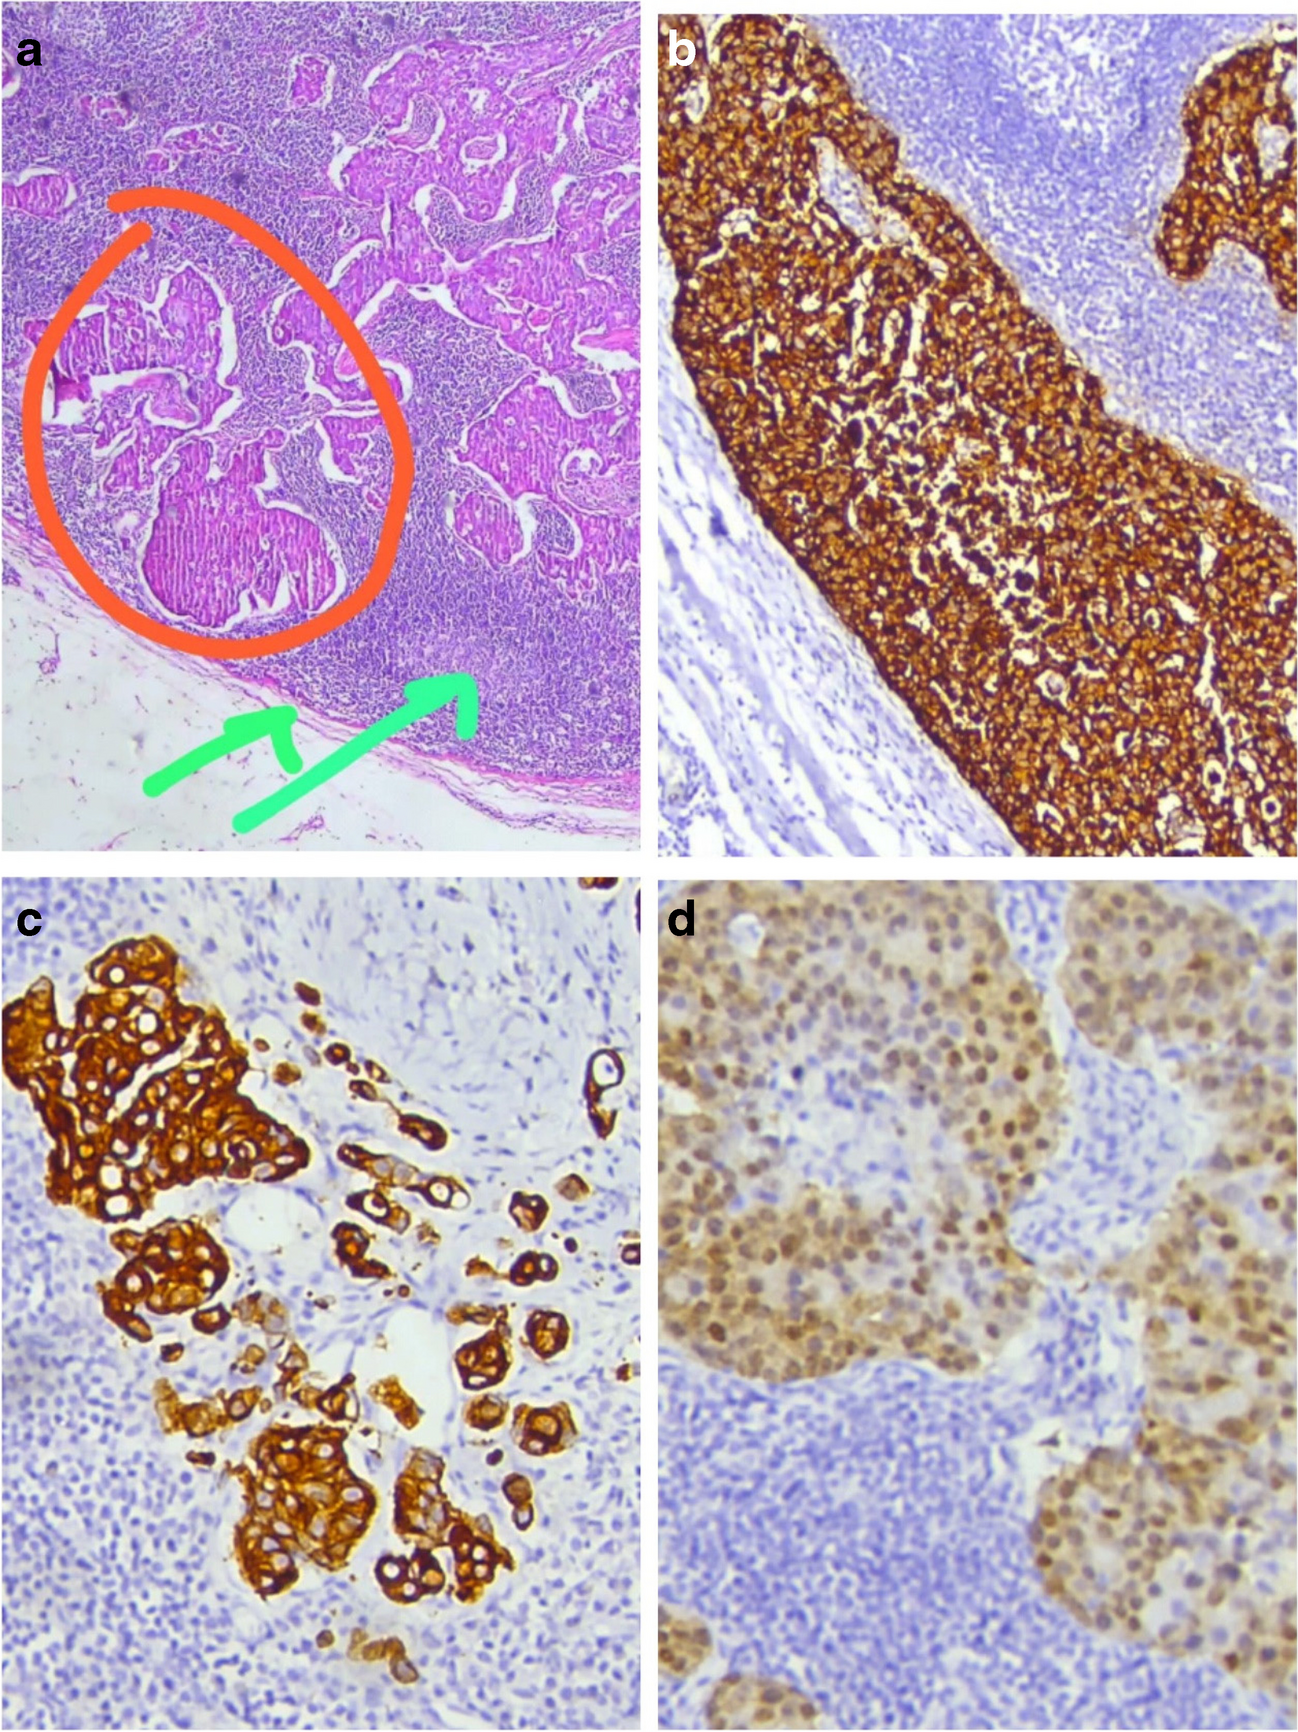 Isolated Inguinal Lymph Node Metastasis from Colon Cancer: A Case Report